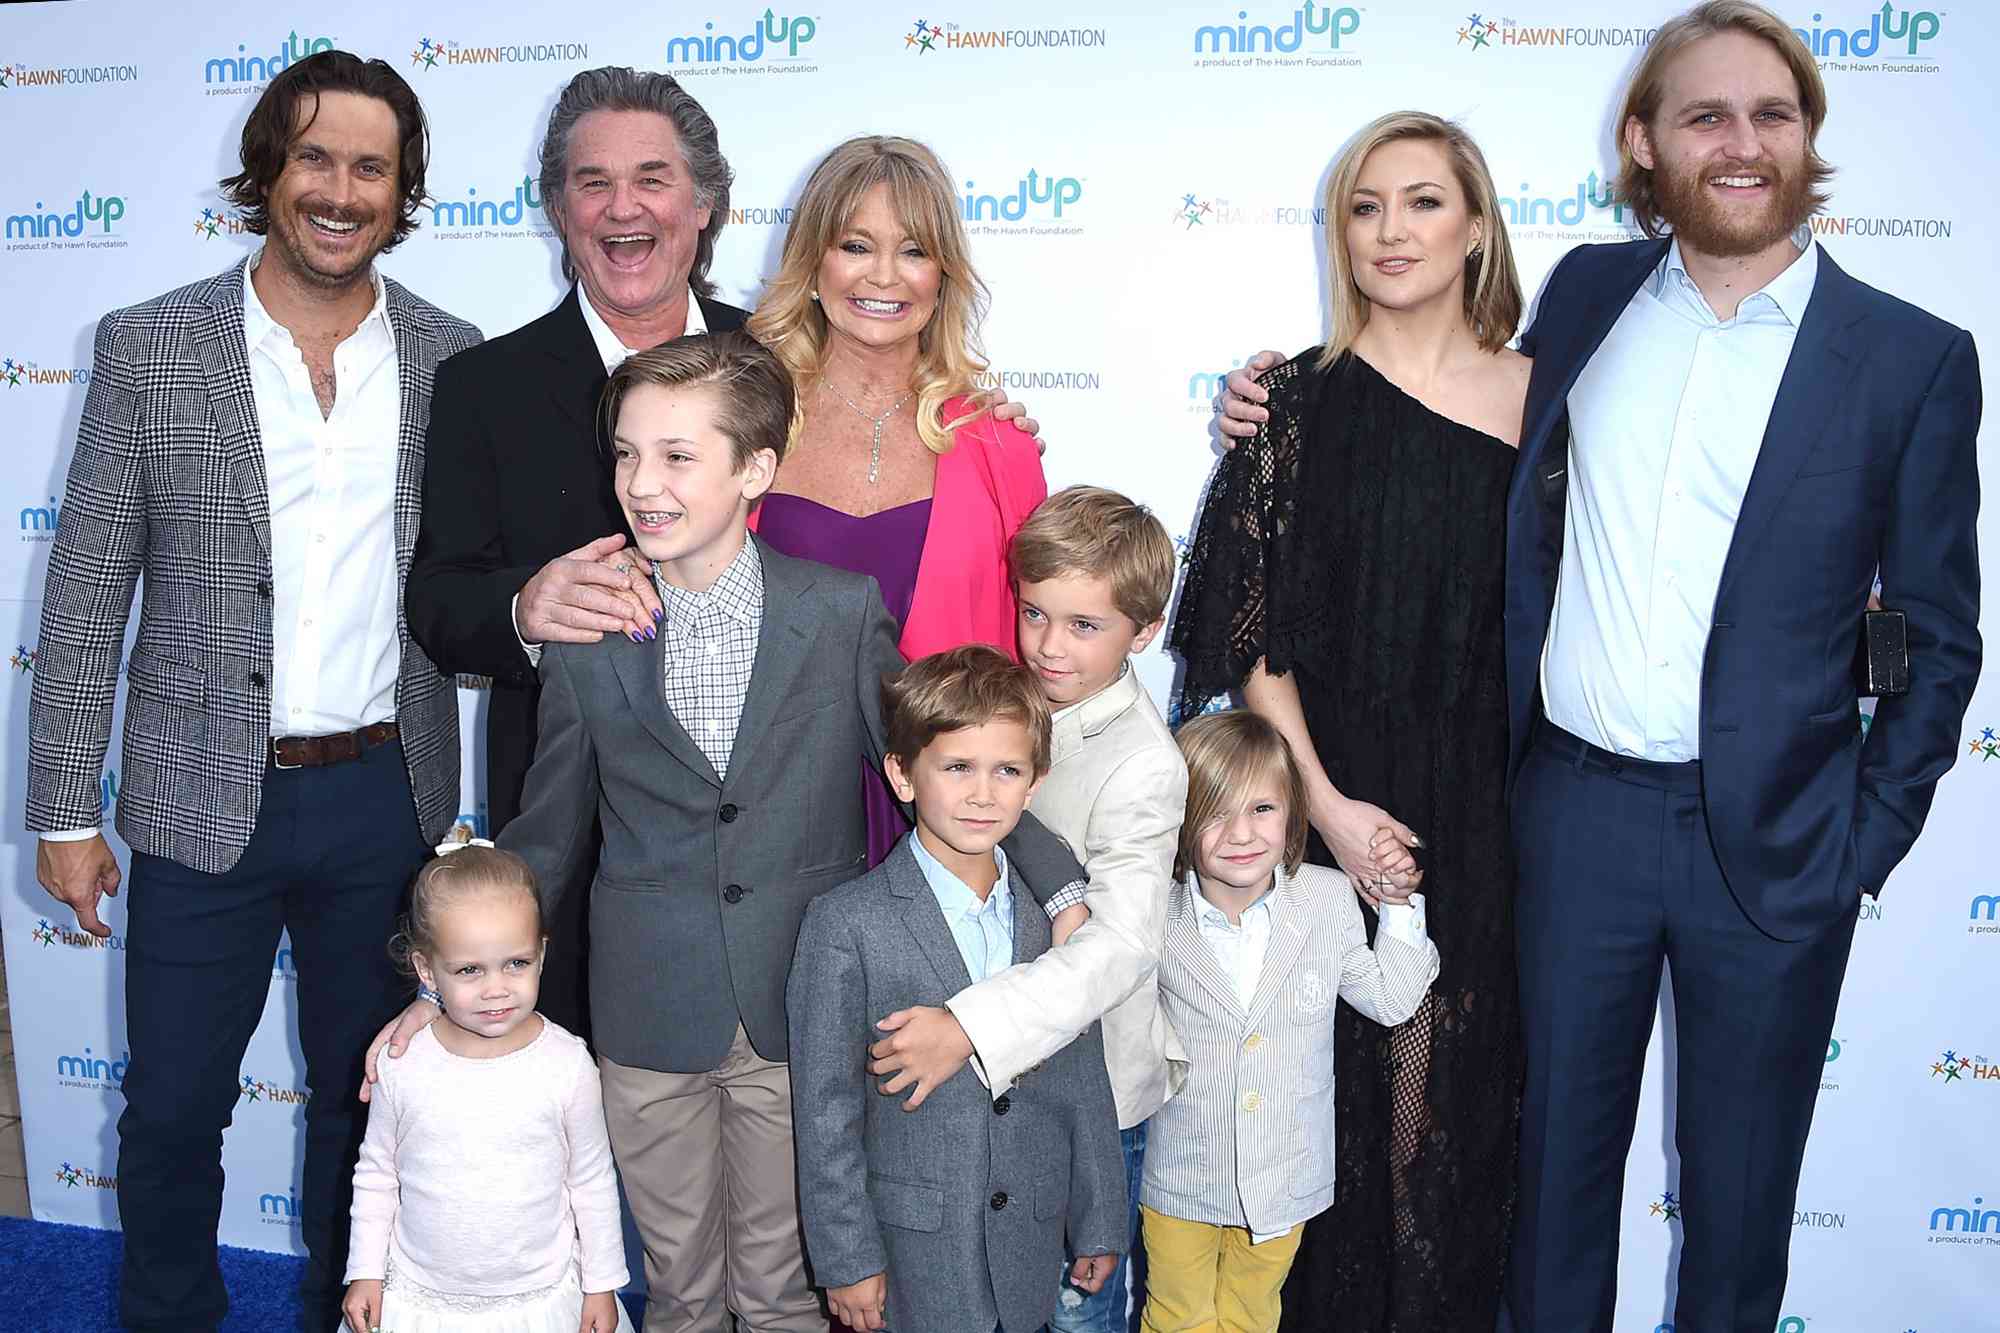 Kate Hudson's 6 Siblings: All About Her Brothers and Sisters